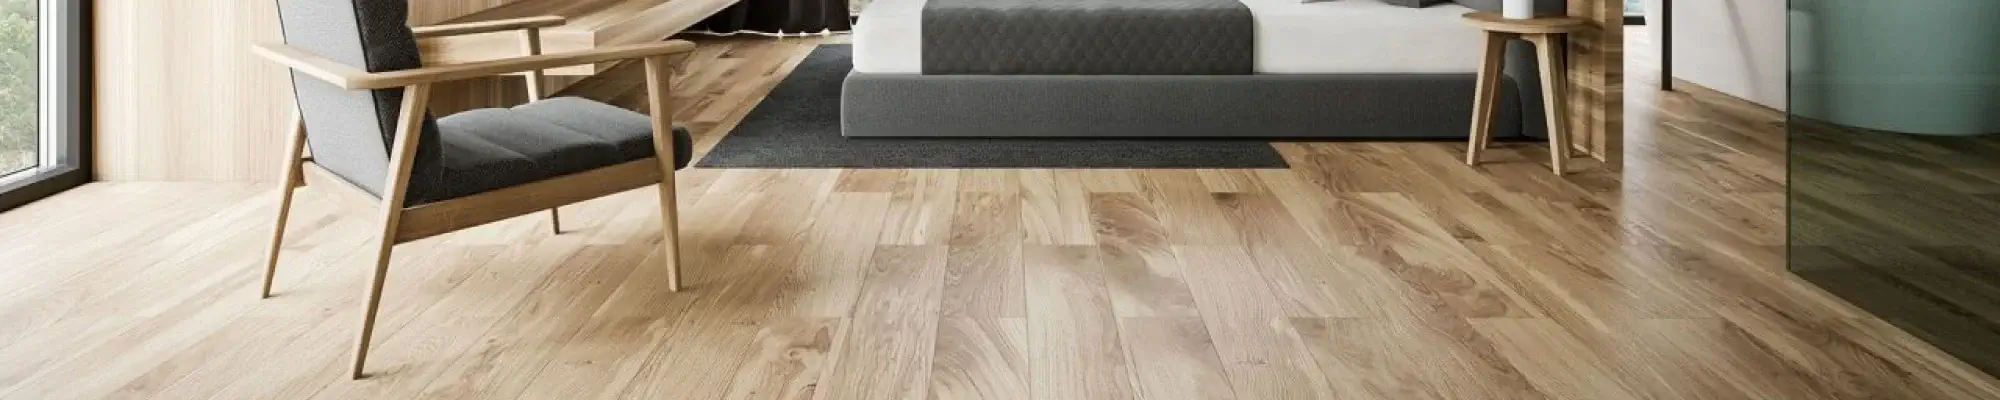 Nistler Floor Covering offers a variety of hardwood and laminate flooring.